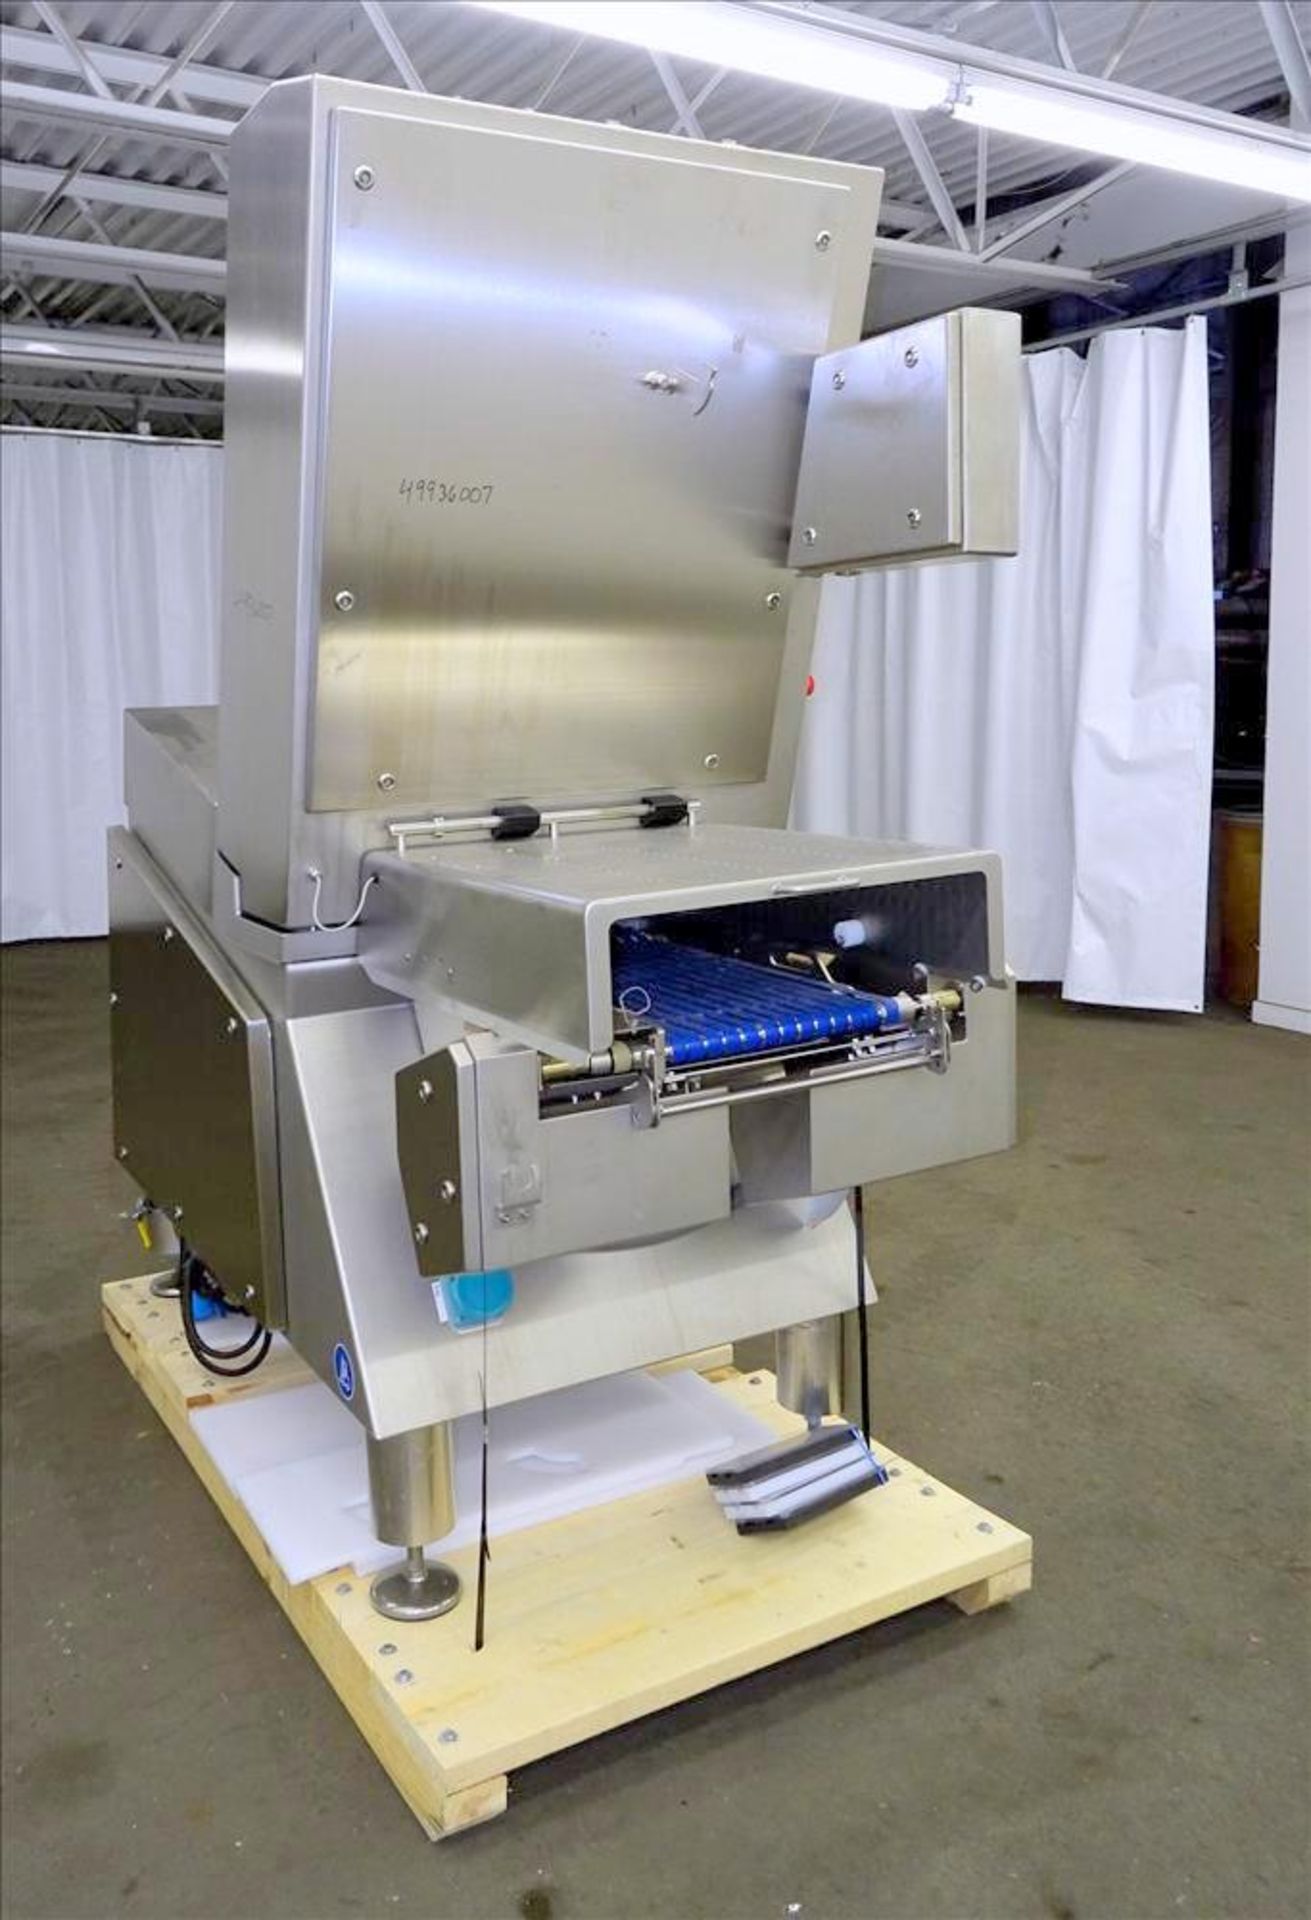 Treif Slicer, Model Divider 660+. 320 x 130 mm / 280 x 160 mm infeed chamber. Serial # 660000 - Image 8 of 16